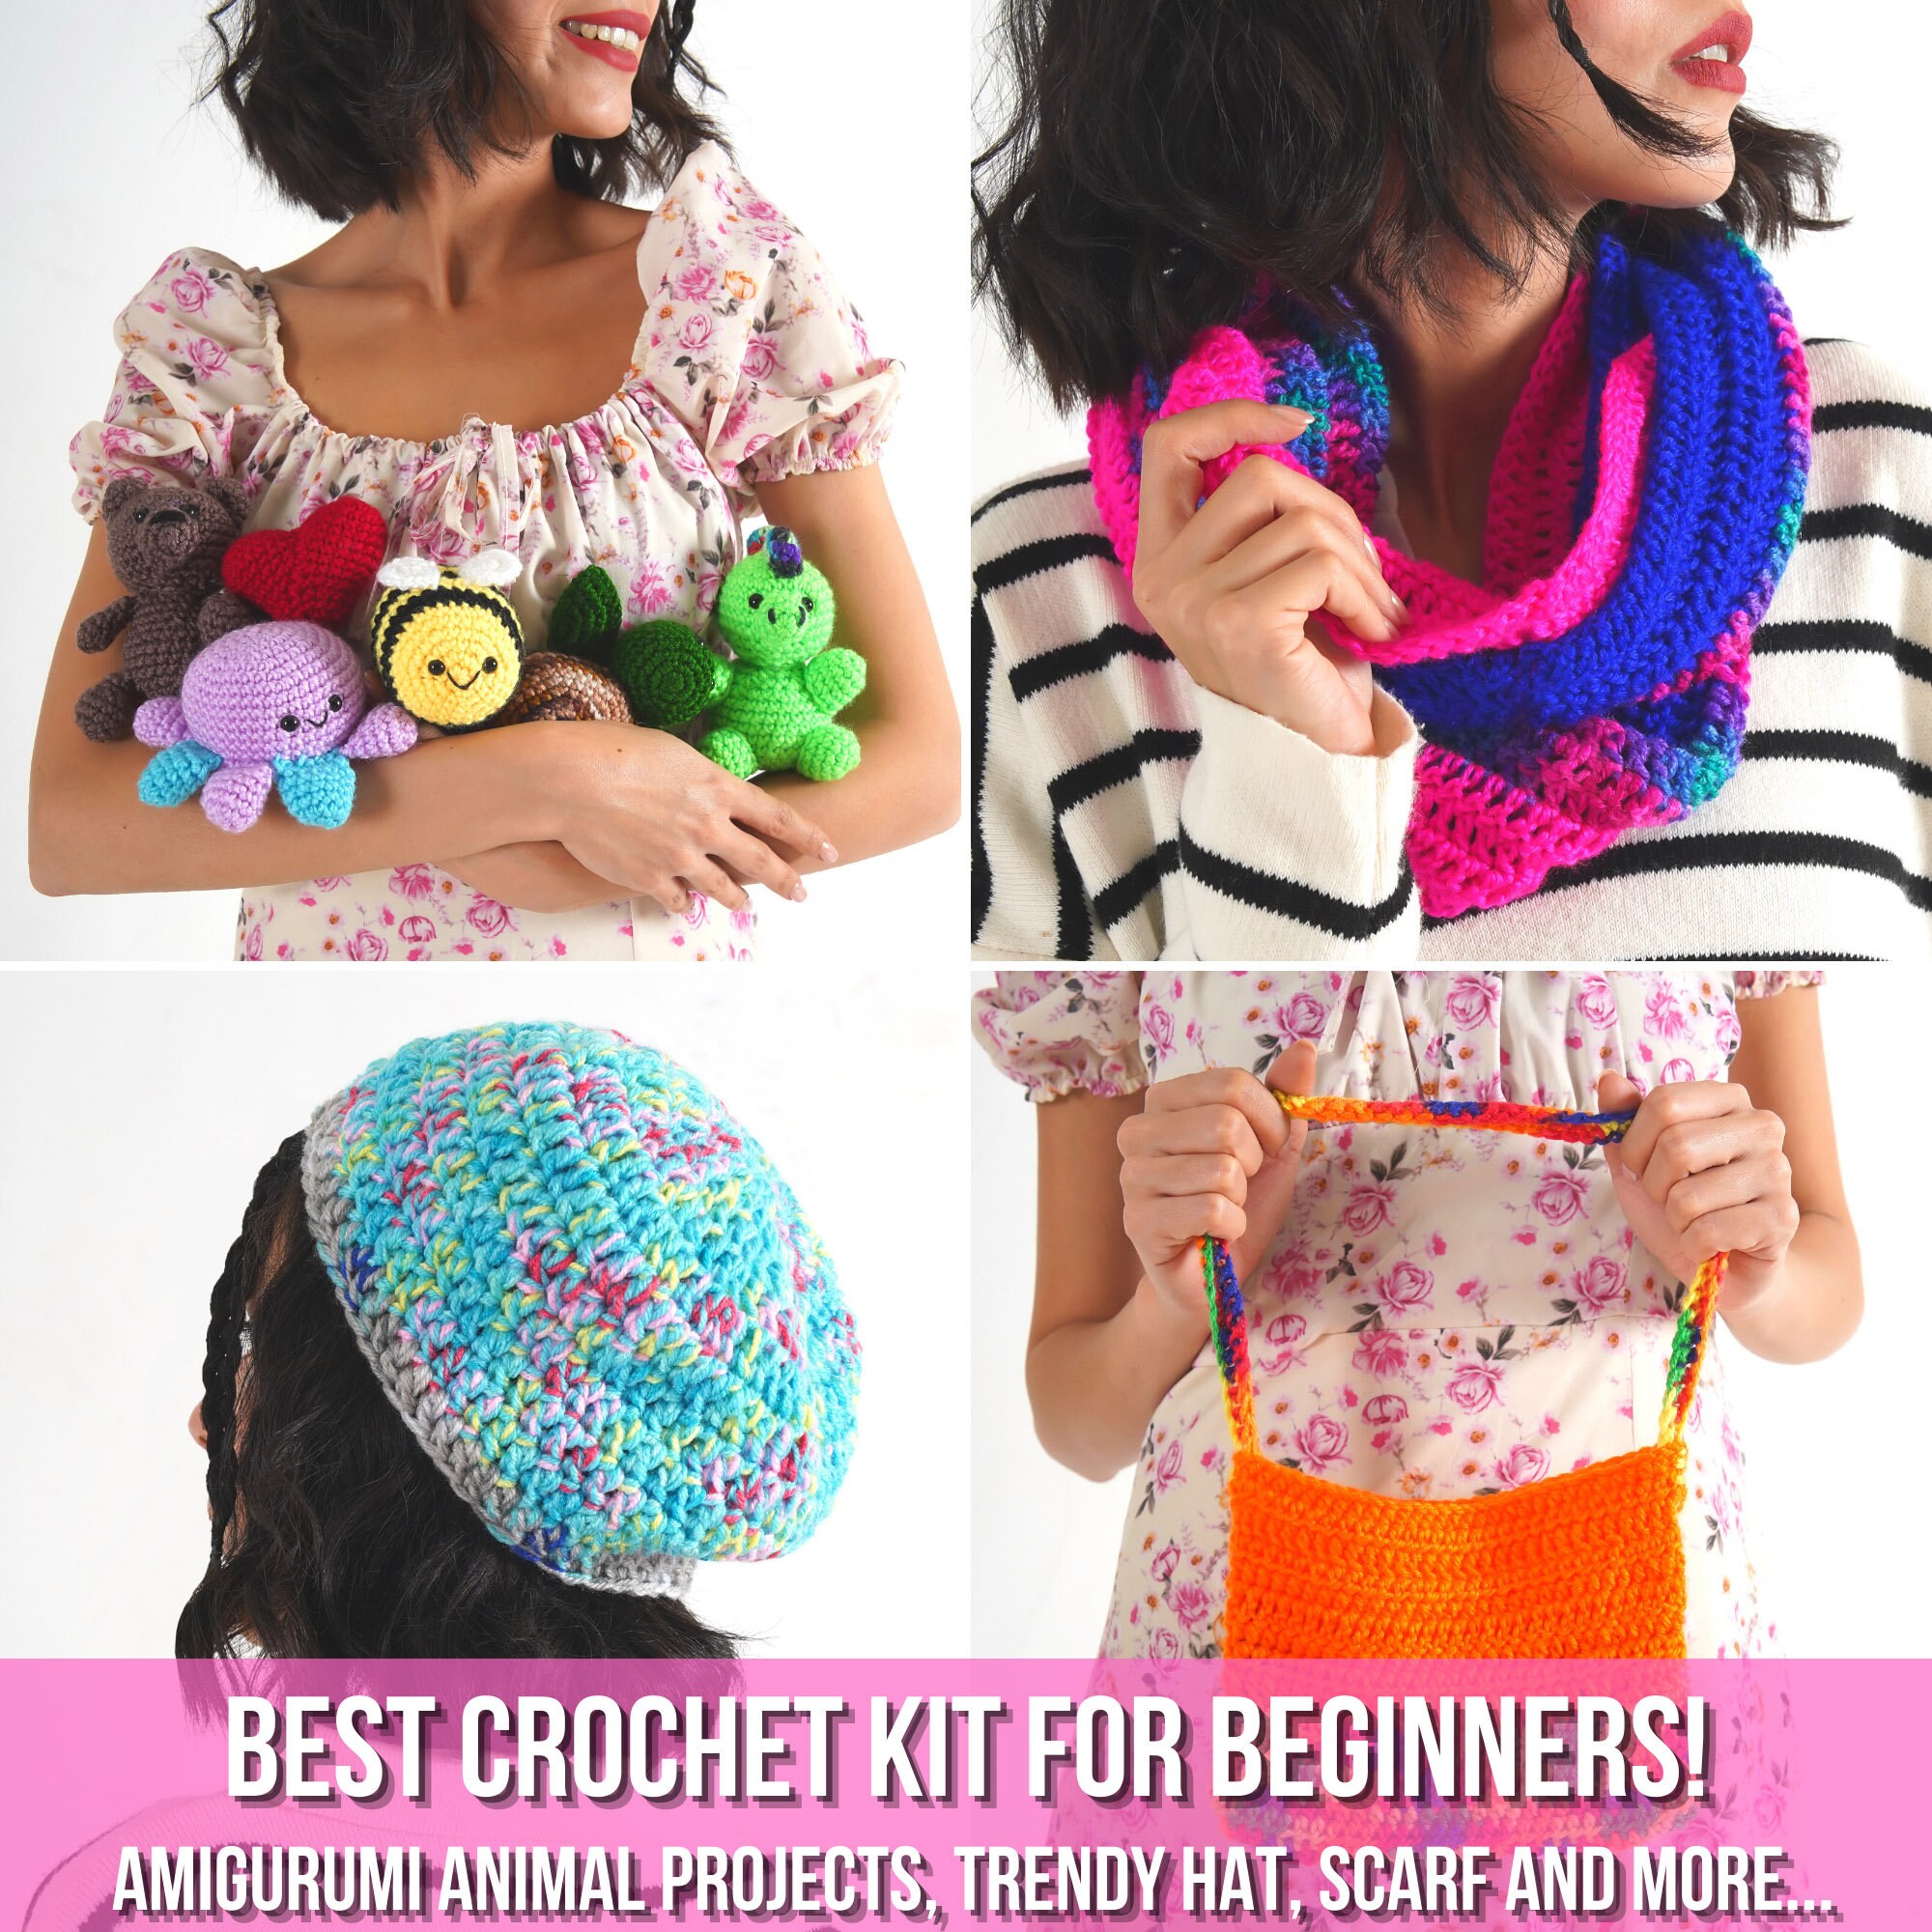 Modda Crochet Kit for Beginners - Beginner Crochet Starter Kit with Easy-to-Follow Video Tutorials, Learn to Crochet Kits for Adults and Kids, DIY